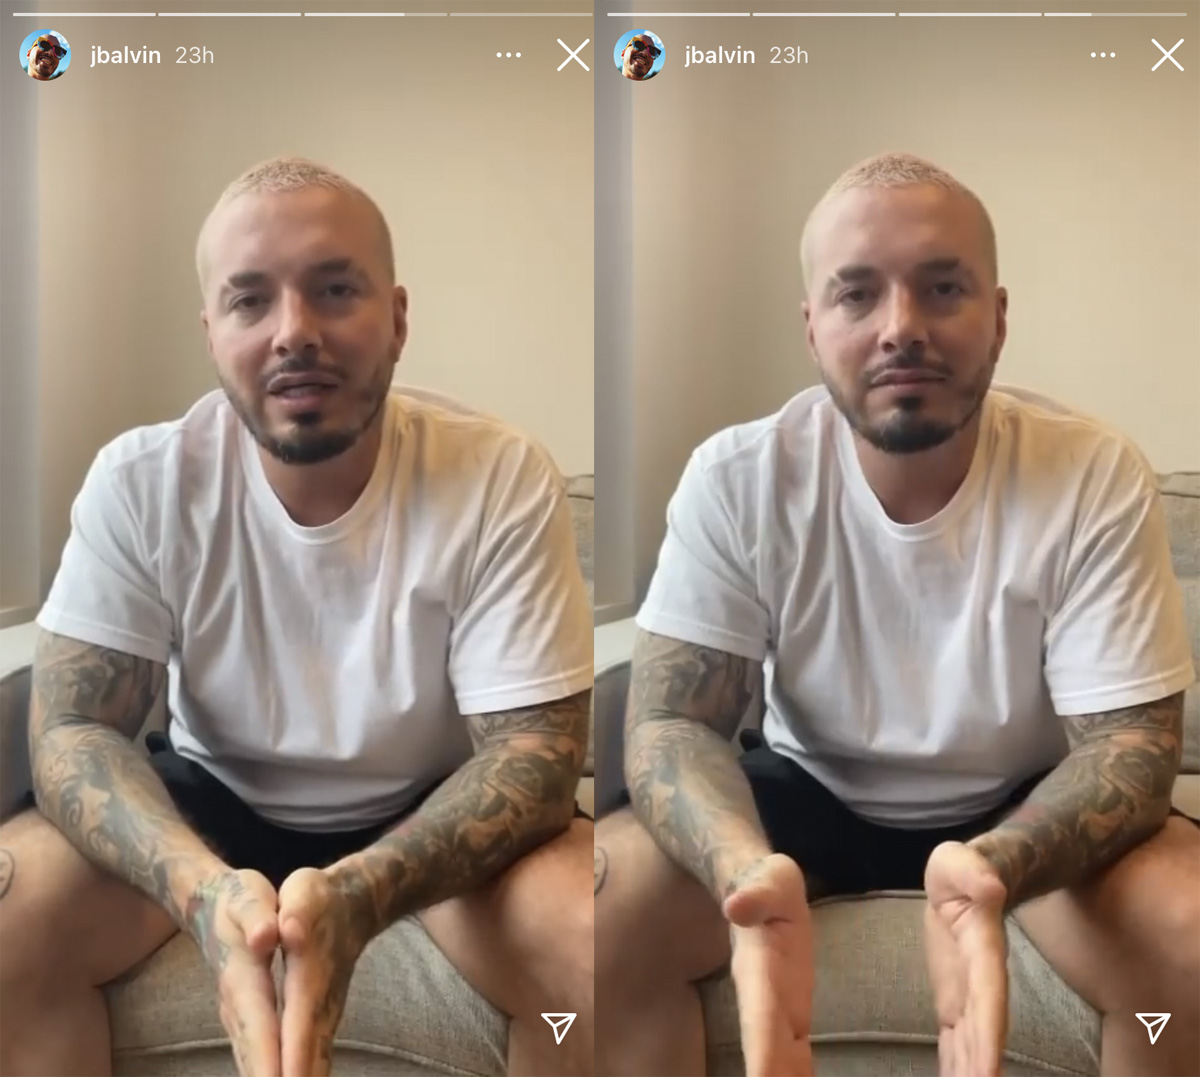 J Balvin Apologizes For Controversial < i> Perra< /i> Music Video After Backlash: 'That's Not Who I Am'